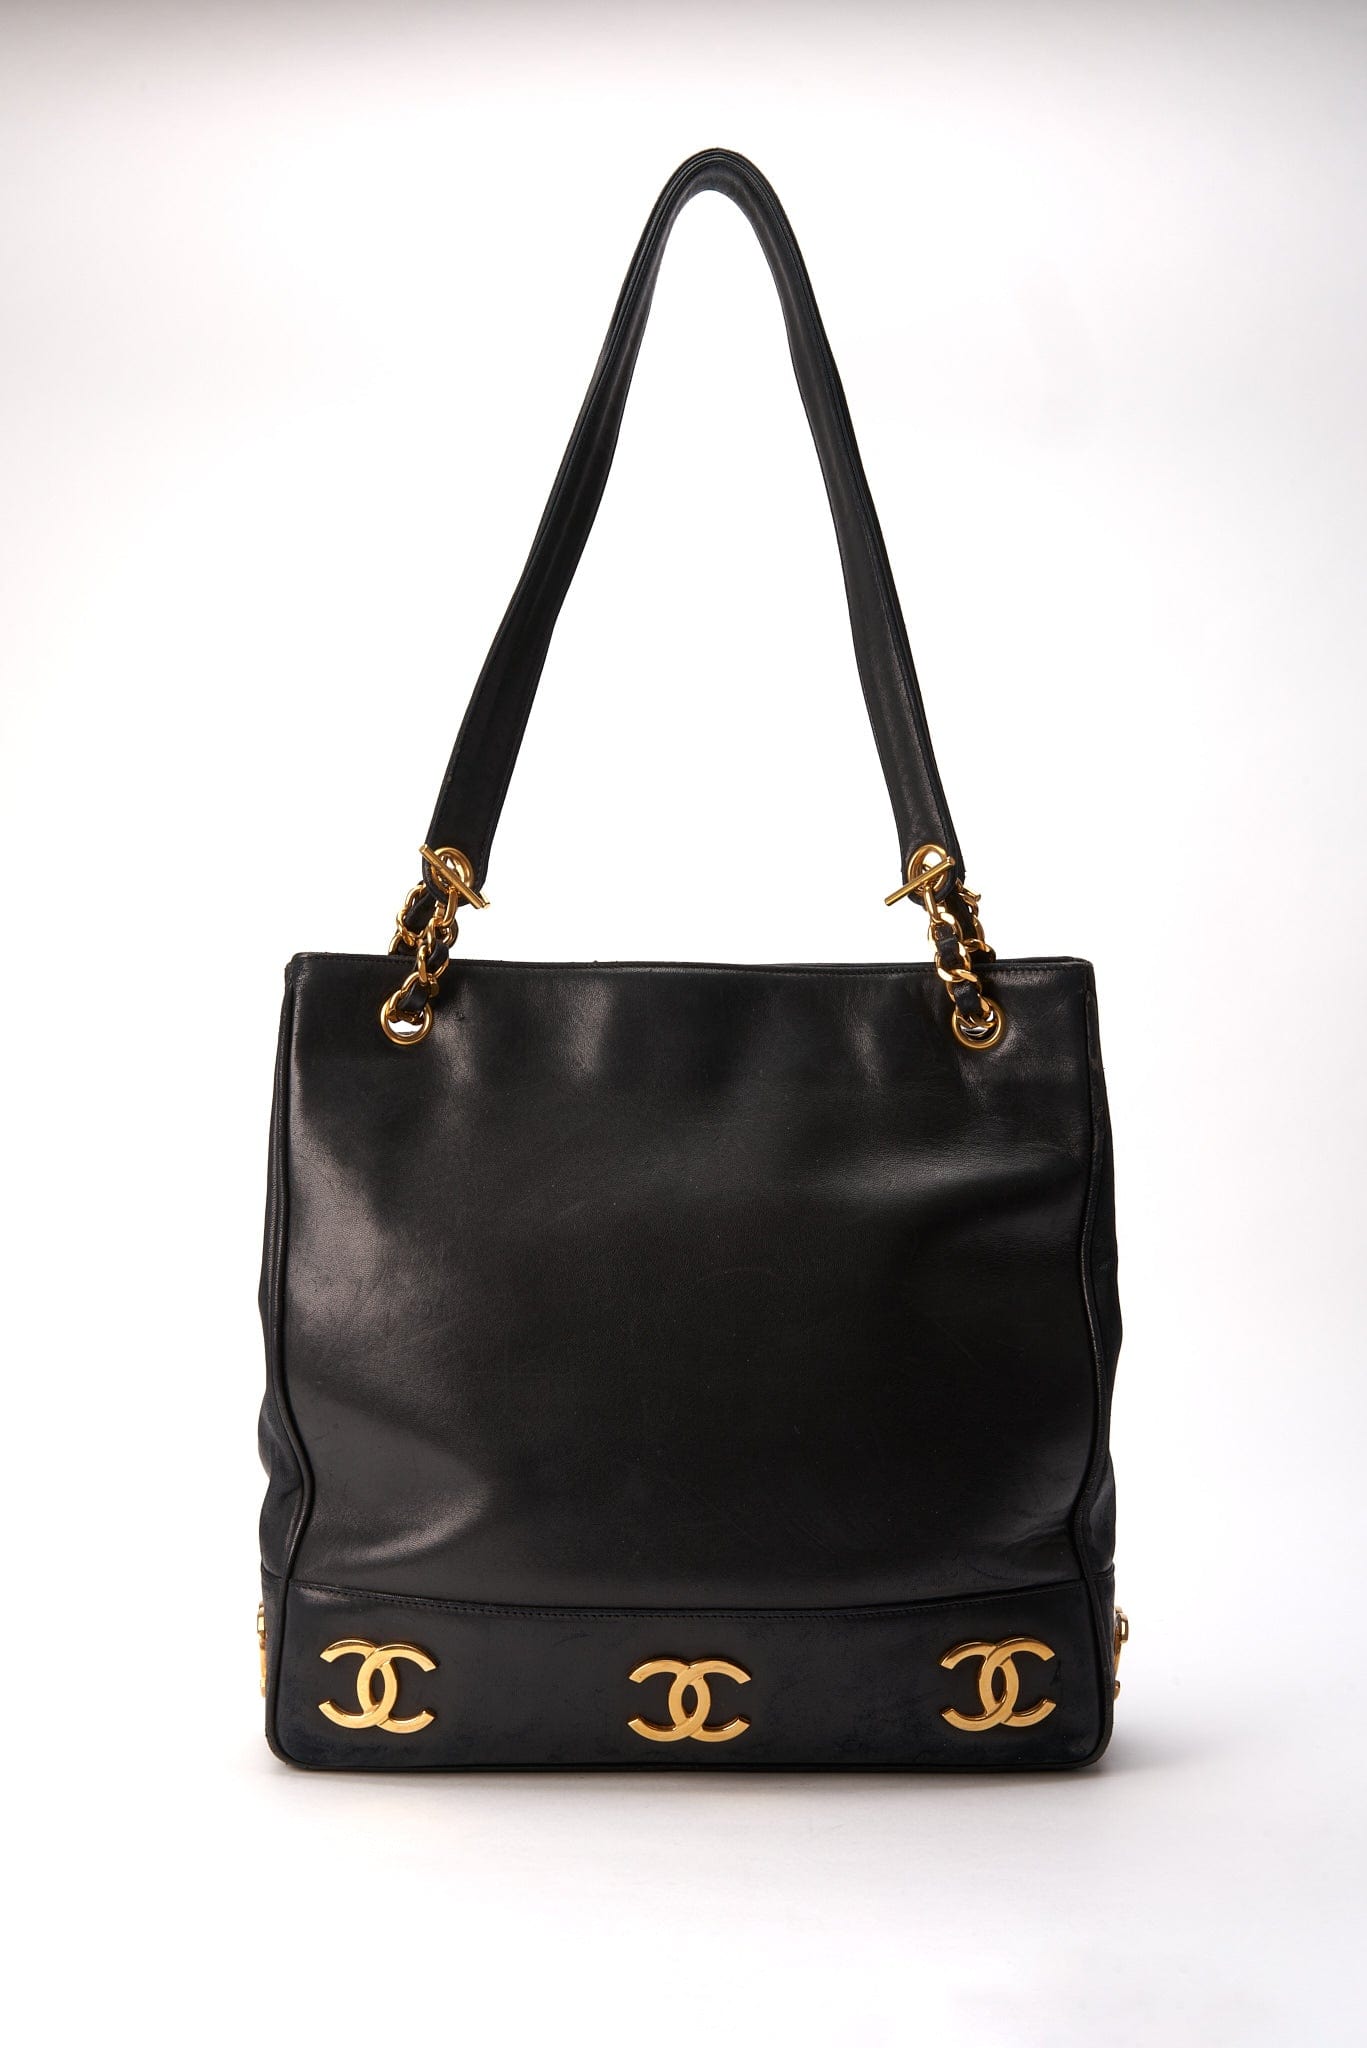 Superb Chanel Shopping Tote in black quilted leather, garniture en